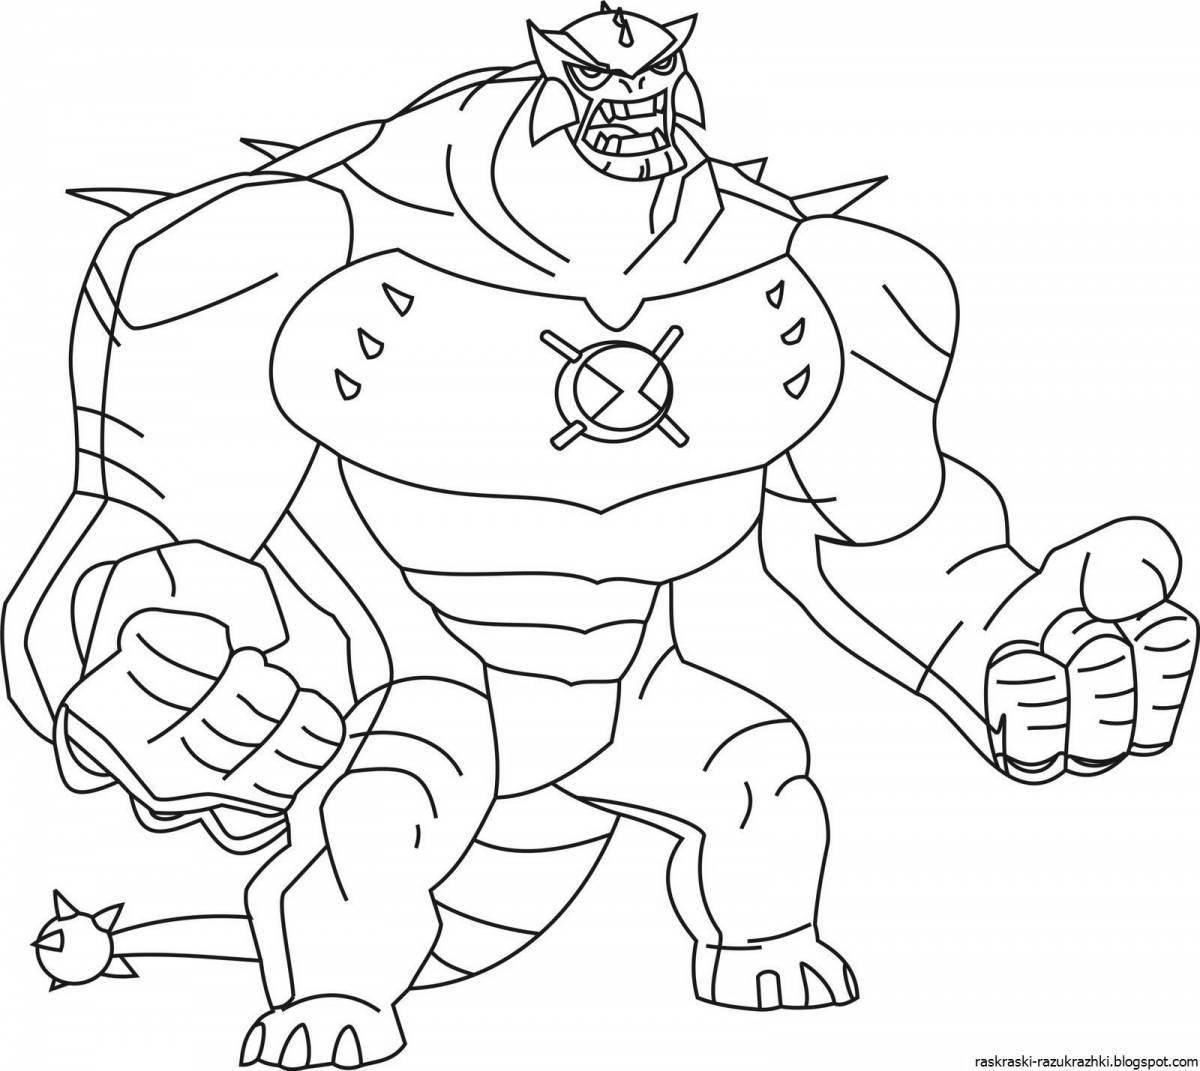 Exciting amogus coloring pages